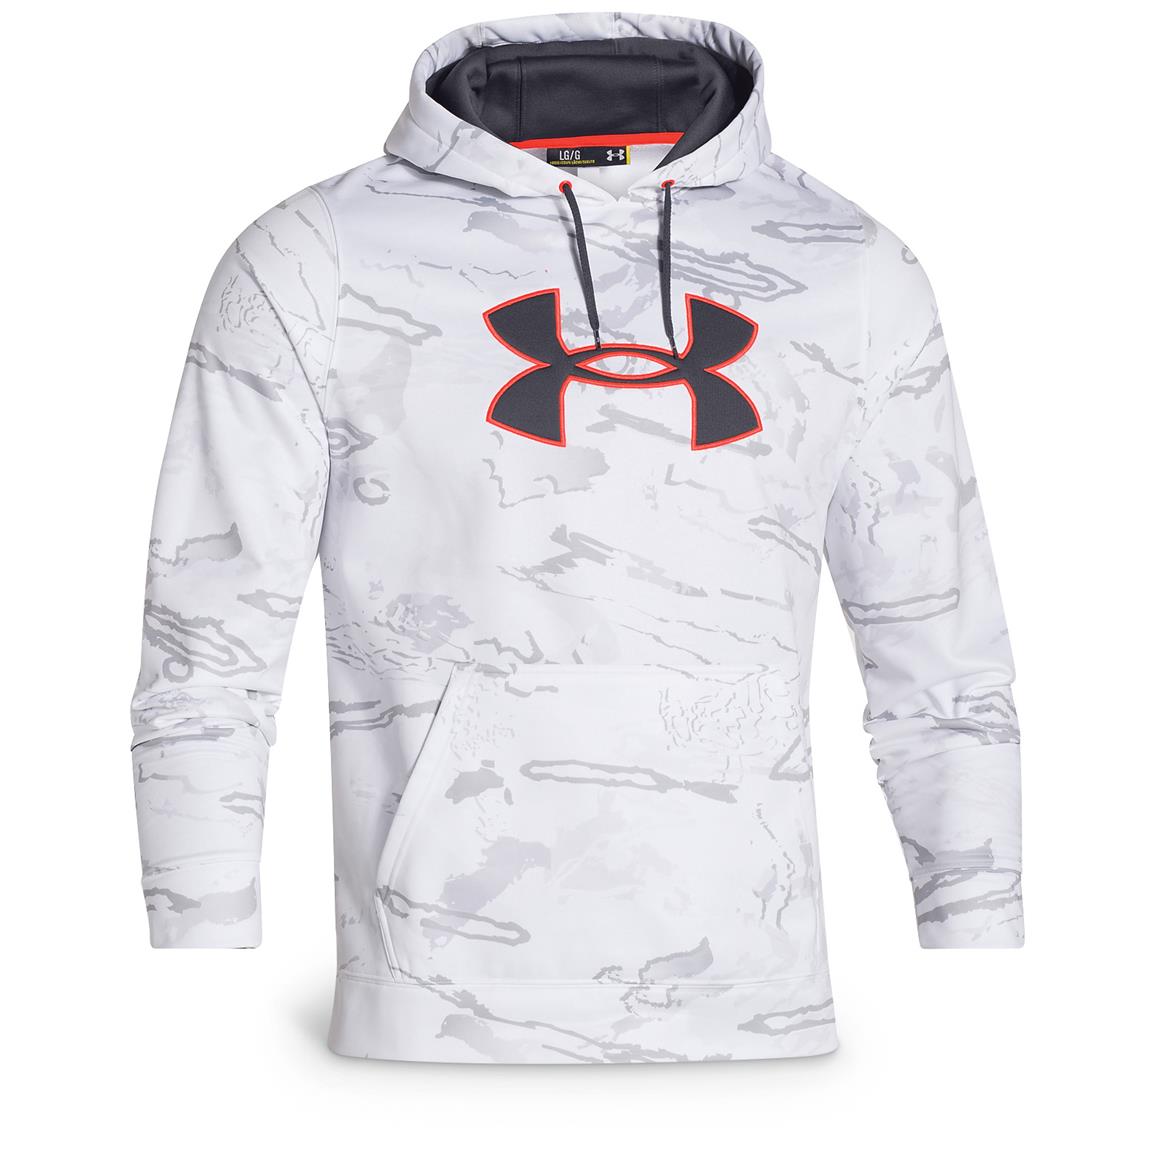 winter jackets mens under armour